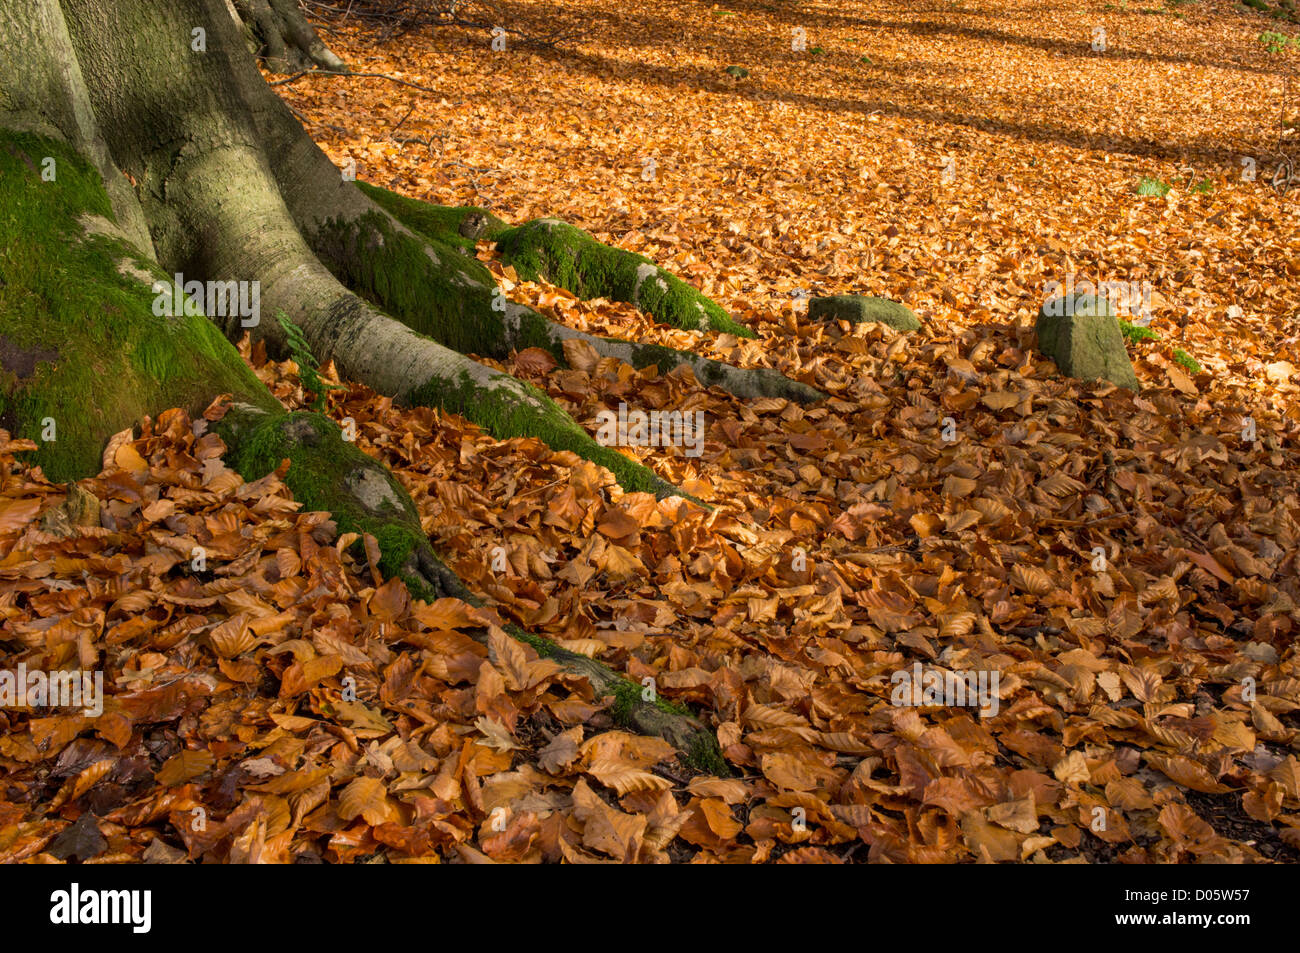 Close-up of trunk & spreading roots of beech tree, forest floor covered in carpet of sunlit brown leaves - Bolton Abbey Estate, Yorkshire, England, UK Stock Photo